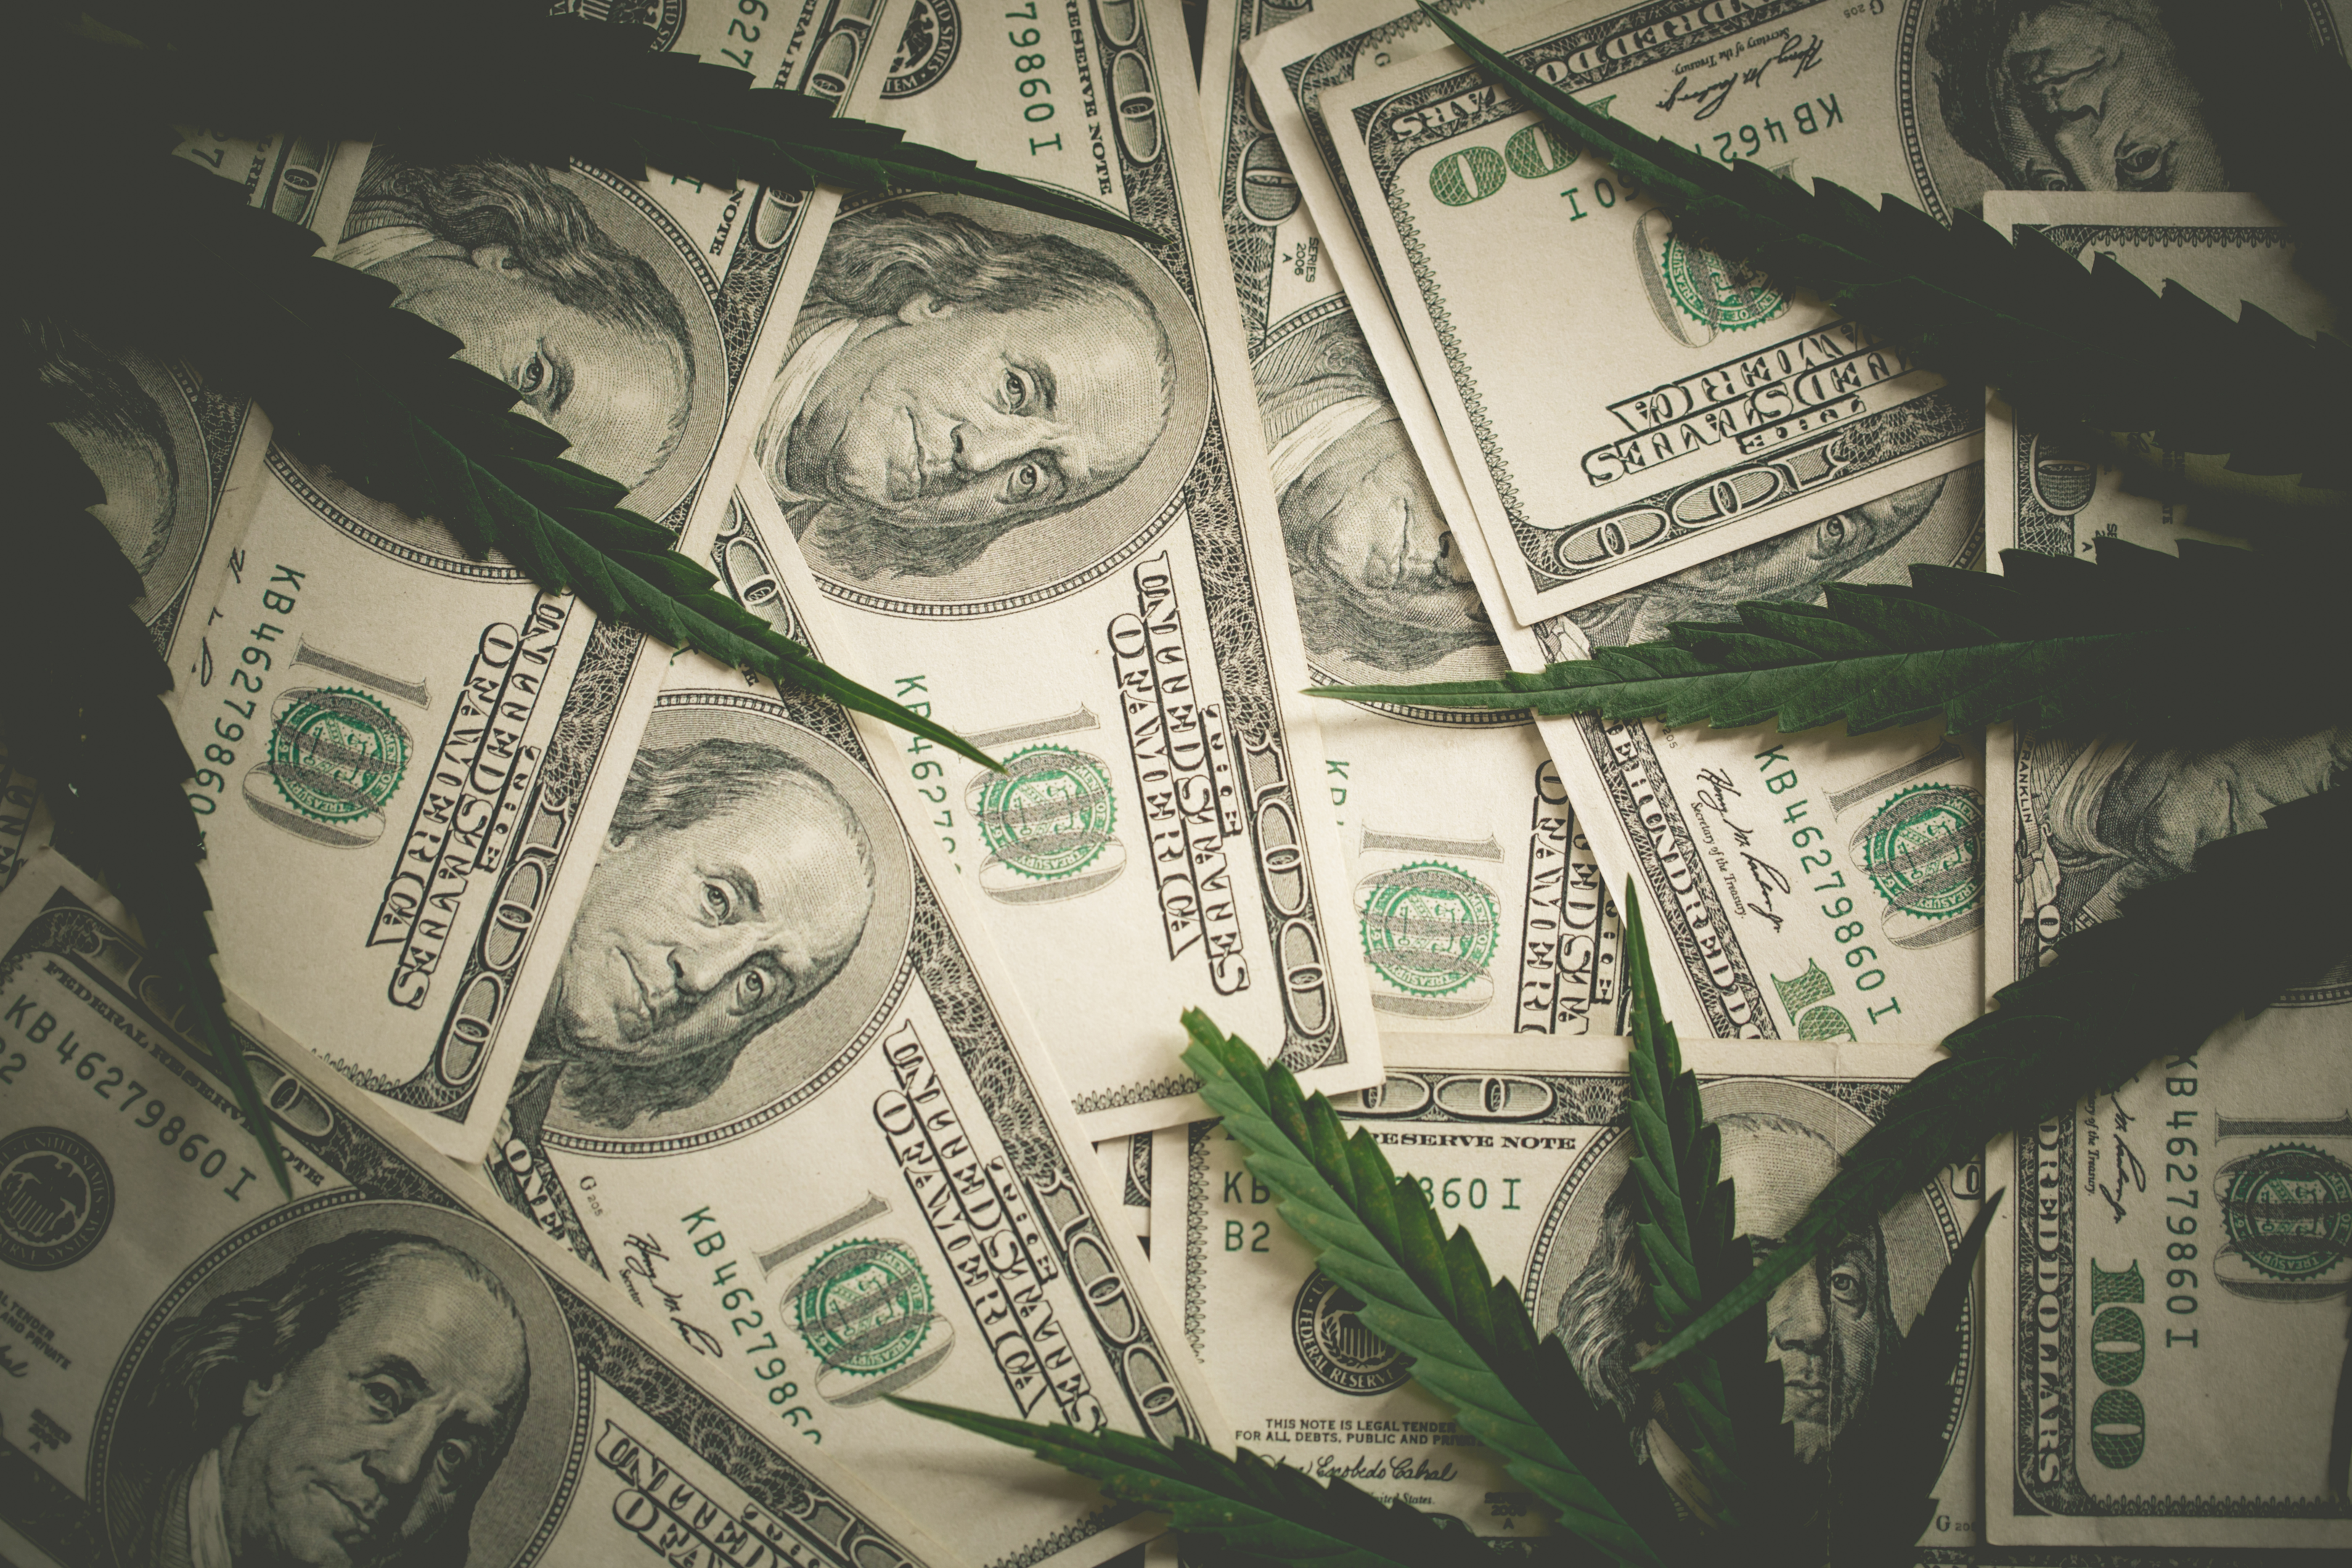 Michigan had a record-breaking year for their sales, with numbers breaking $3 billion. That's up about $700 million from the prior year, signaling a sizeable increase in the amount of marijuana consumption.